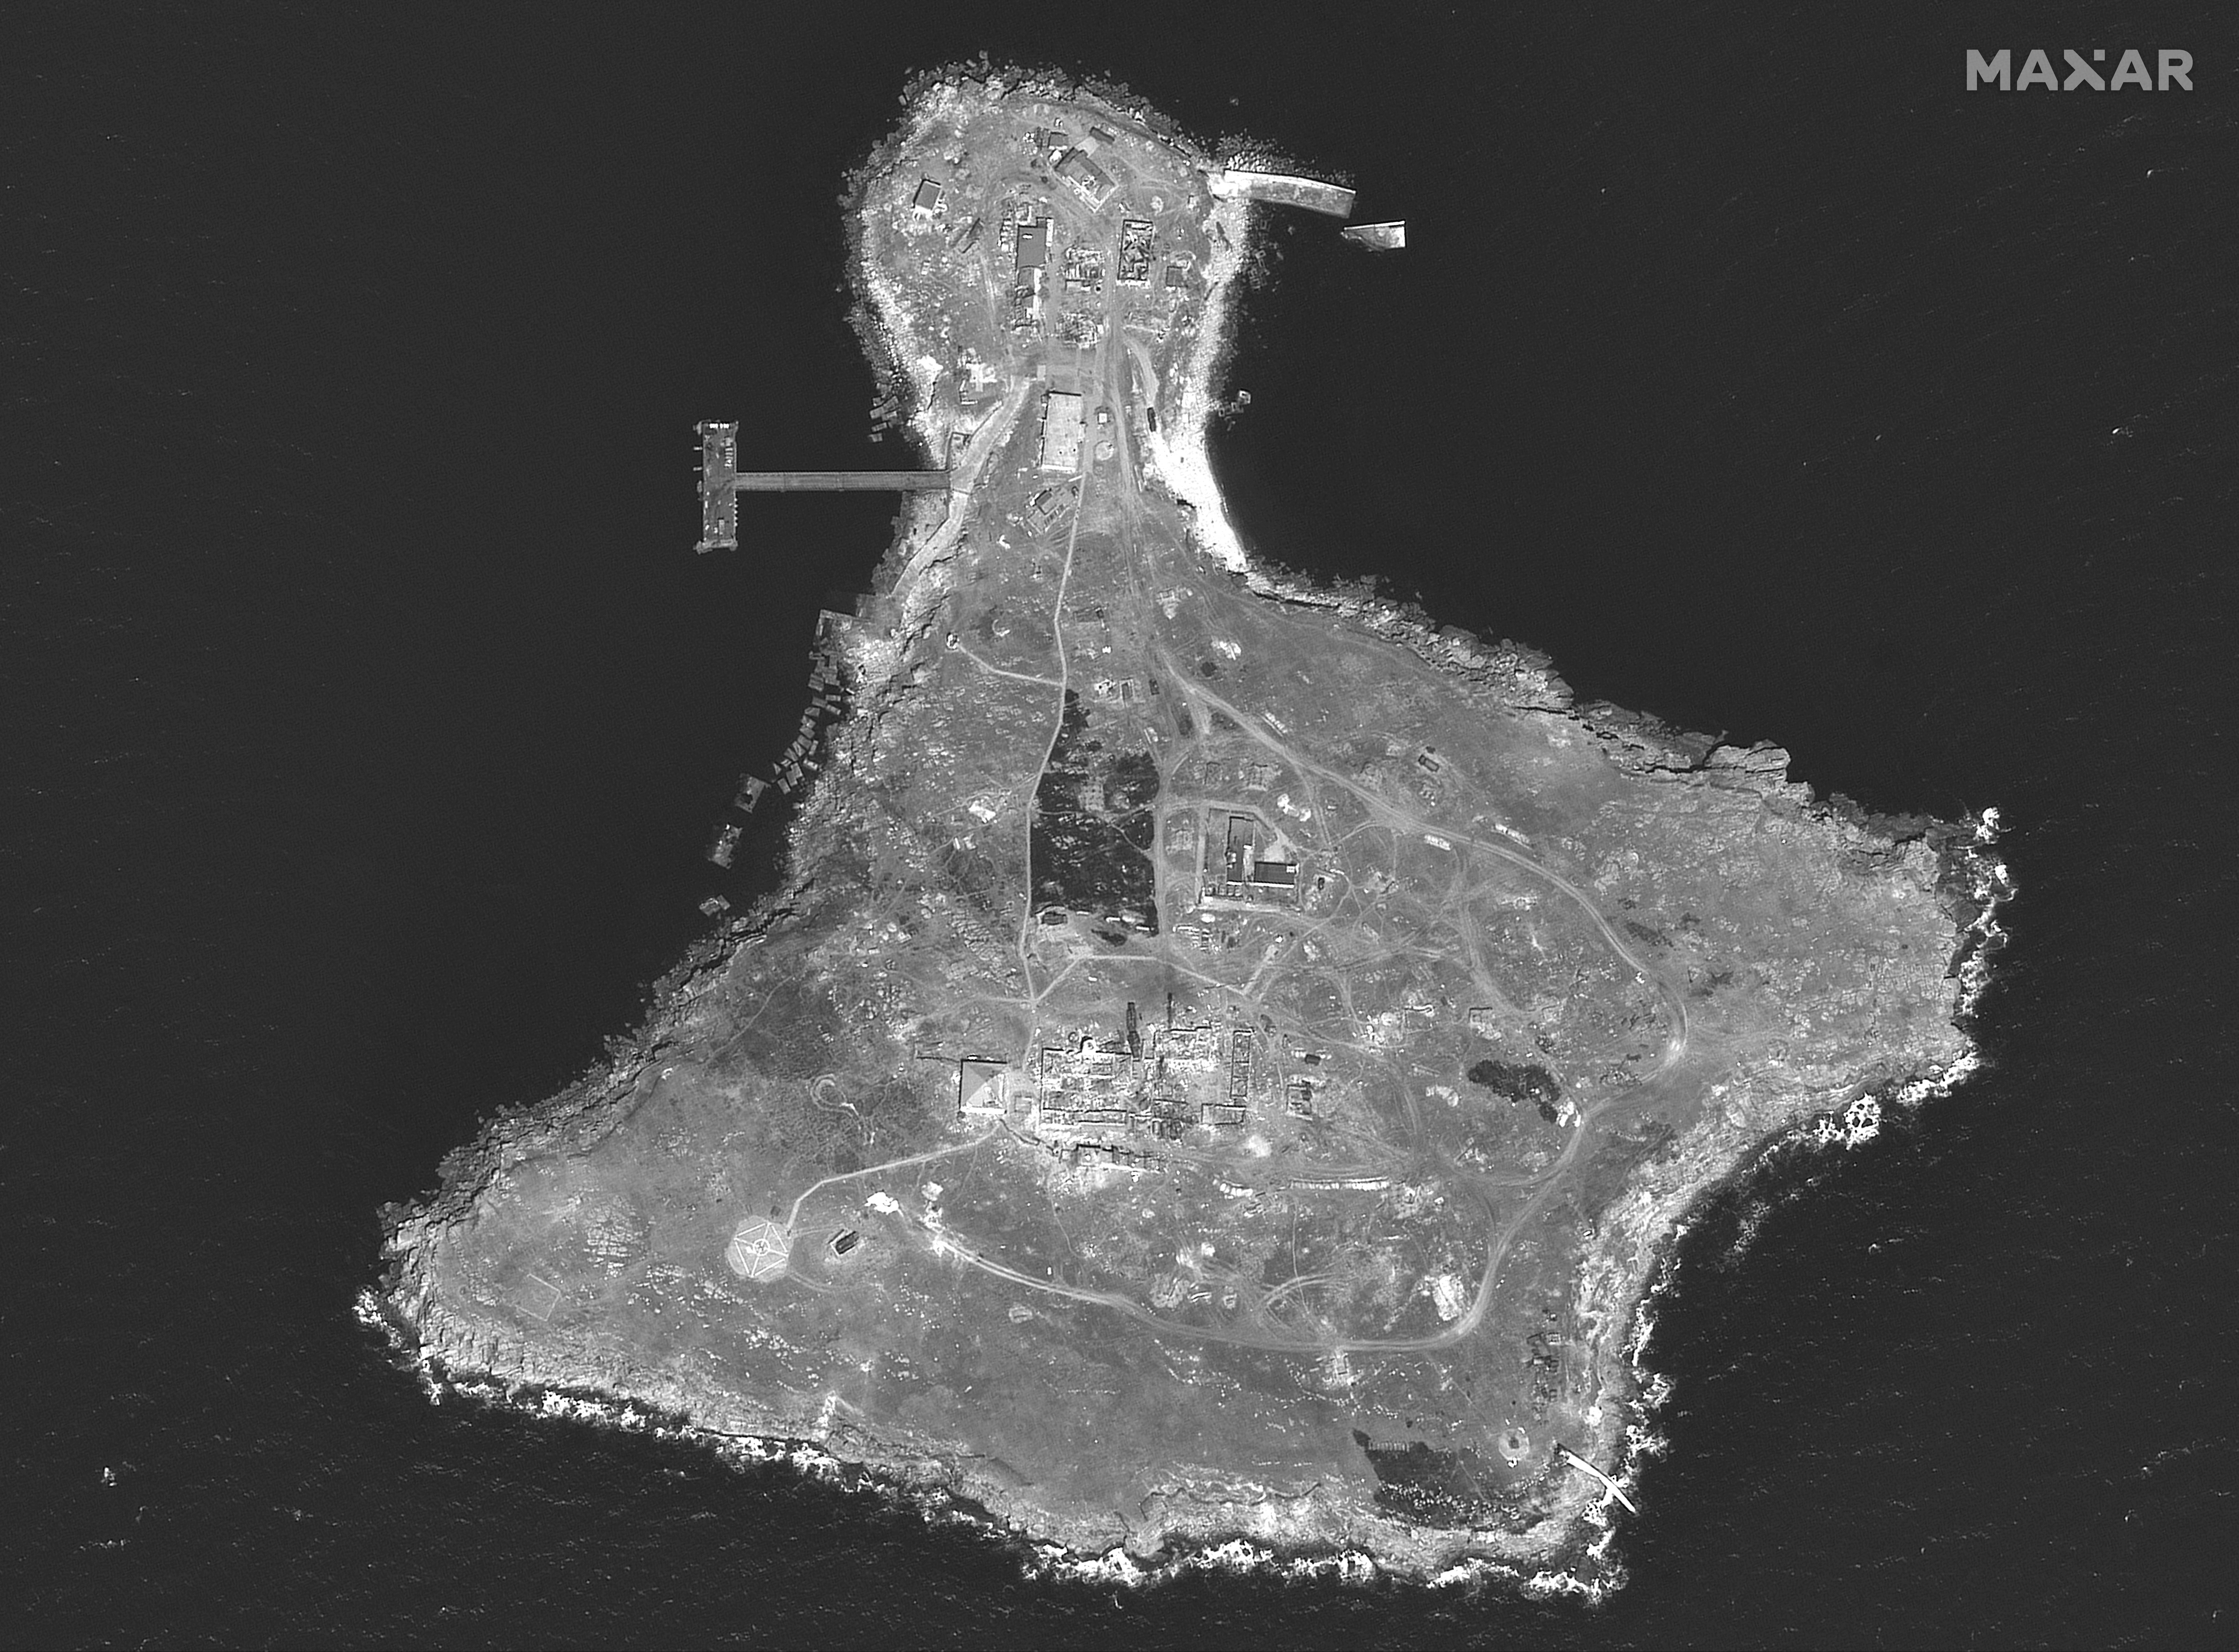 A satellite image shows an overview of Snake Island, Ukraine, on June 21.